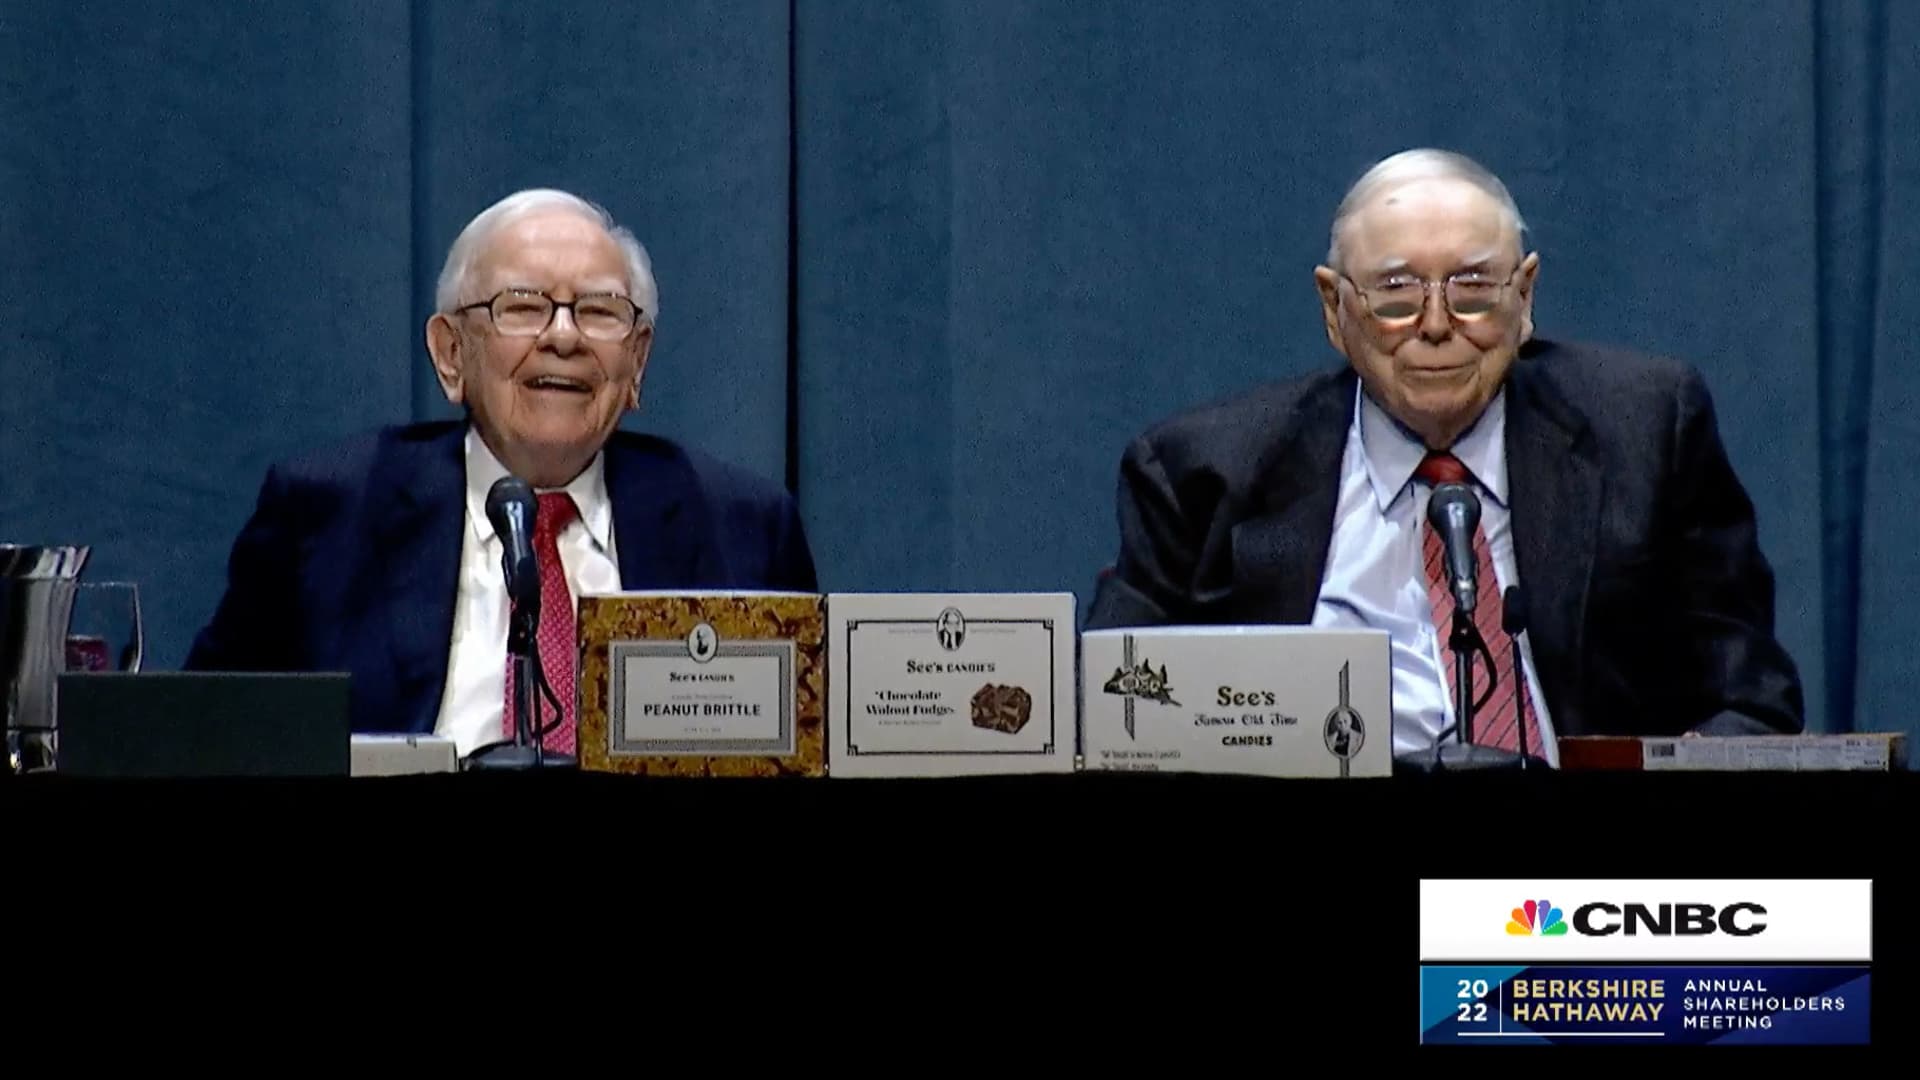 Warren Buffett and Charlie Munger press conference at the Berkshire Hathaway Annual Shareholders Meeting, April 30, 2022.